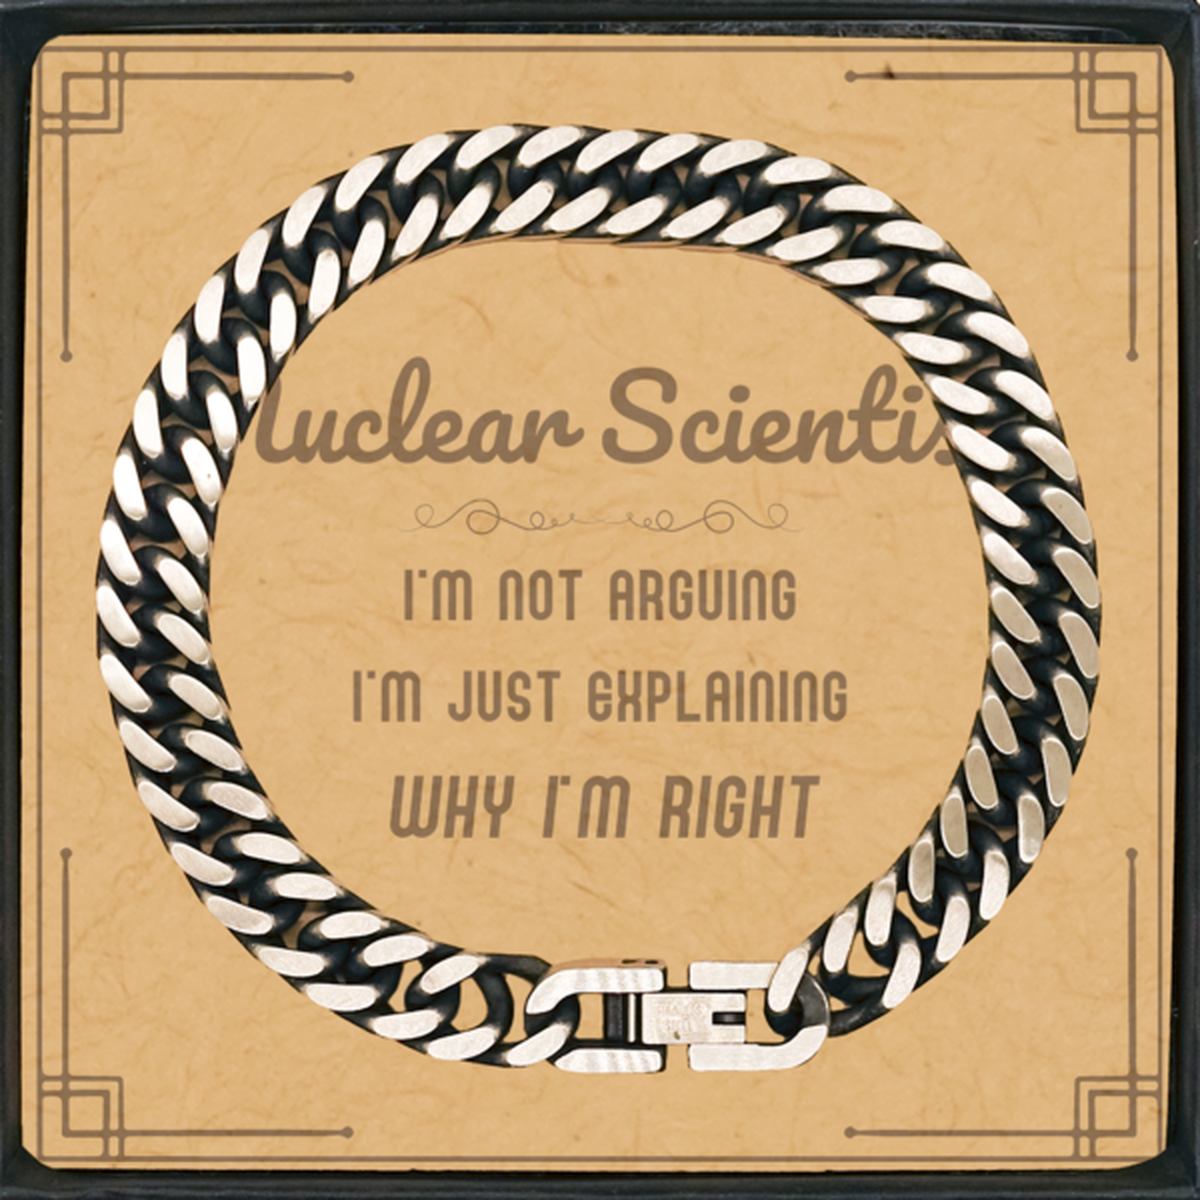 Nuclear Scientist I'm not Arguing. I'm Just Explaining Why I'm RIGHT Cuban Link Chain Bracelet, Funny Saying Quote Nuclear Scientist Gifts For Nuclear Scientist Message Card Graduation Birthday Christmas Gifts for Men Women Coworker